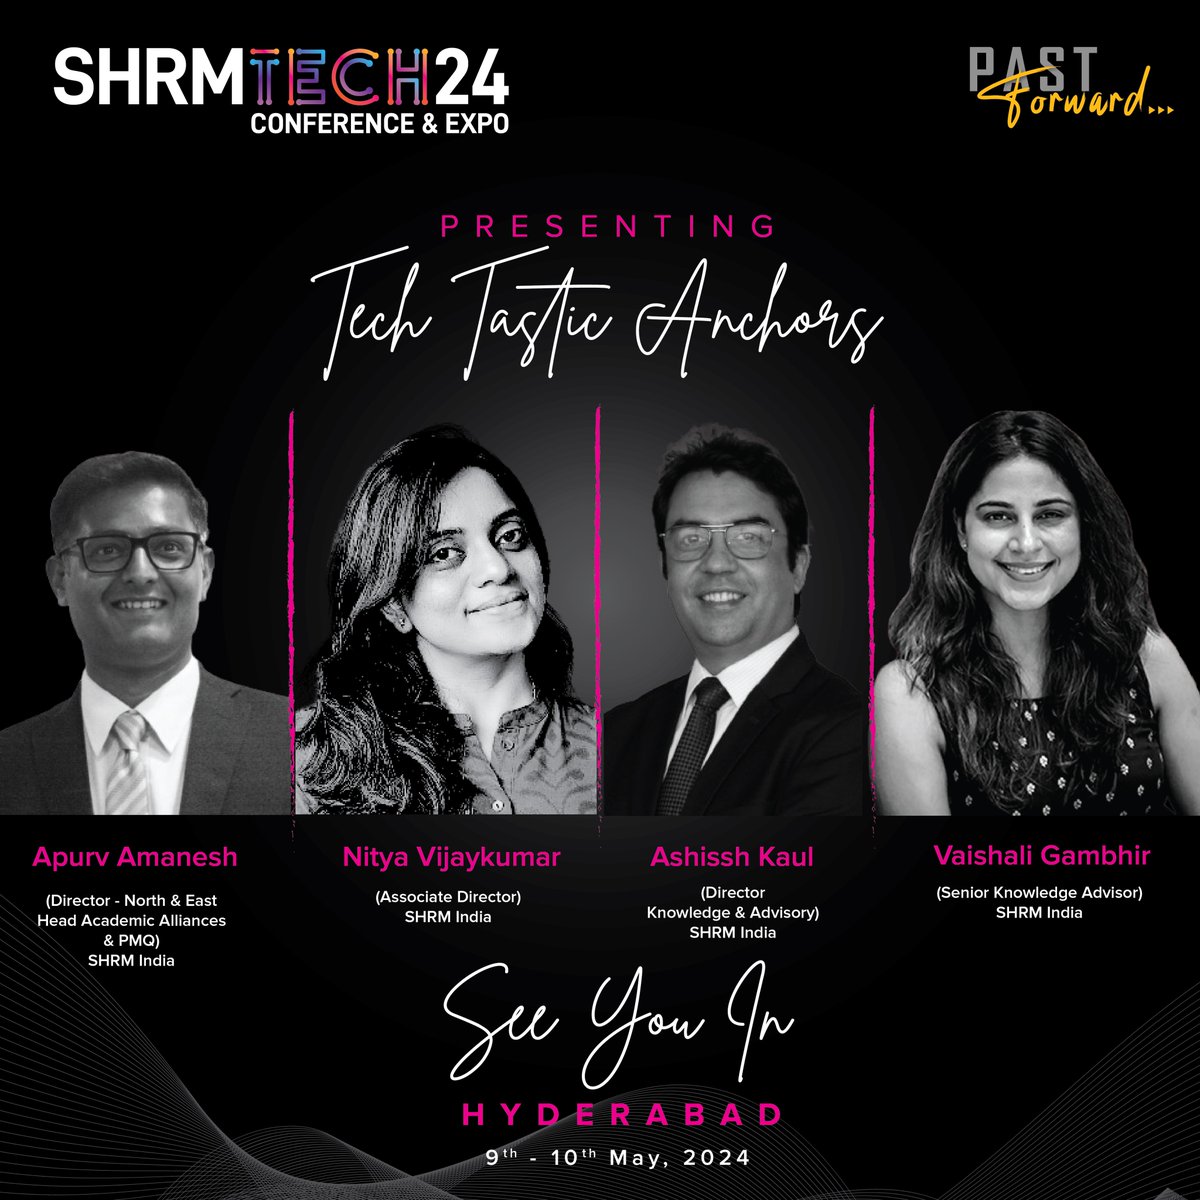 Introducing the dynamic anchors who'll be guiding us through our upcoming #shrmindiatech conference. Their energy, expertise, and eloquence are sure to make this event unforgettable! Stay tuned for more updates and get ready to be captivated by their charisma and charm.…